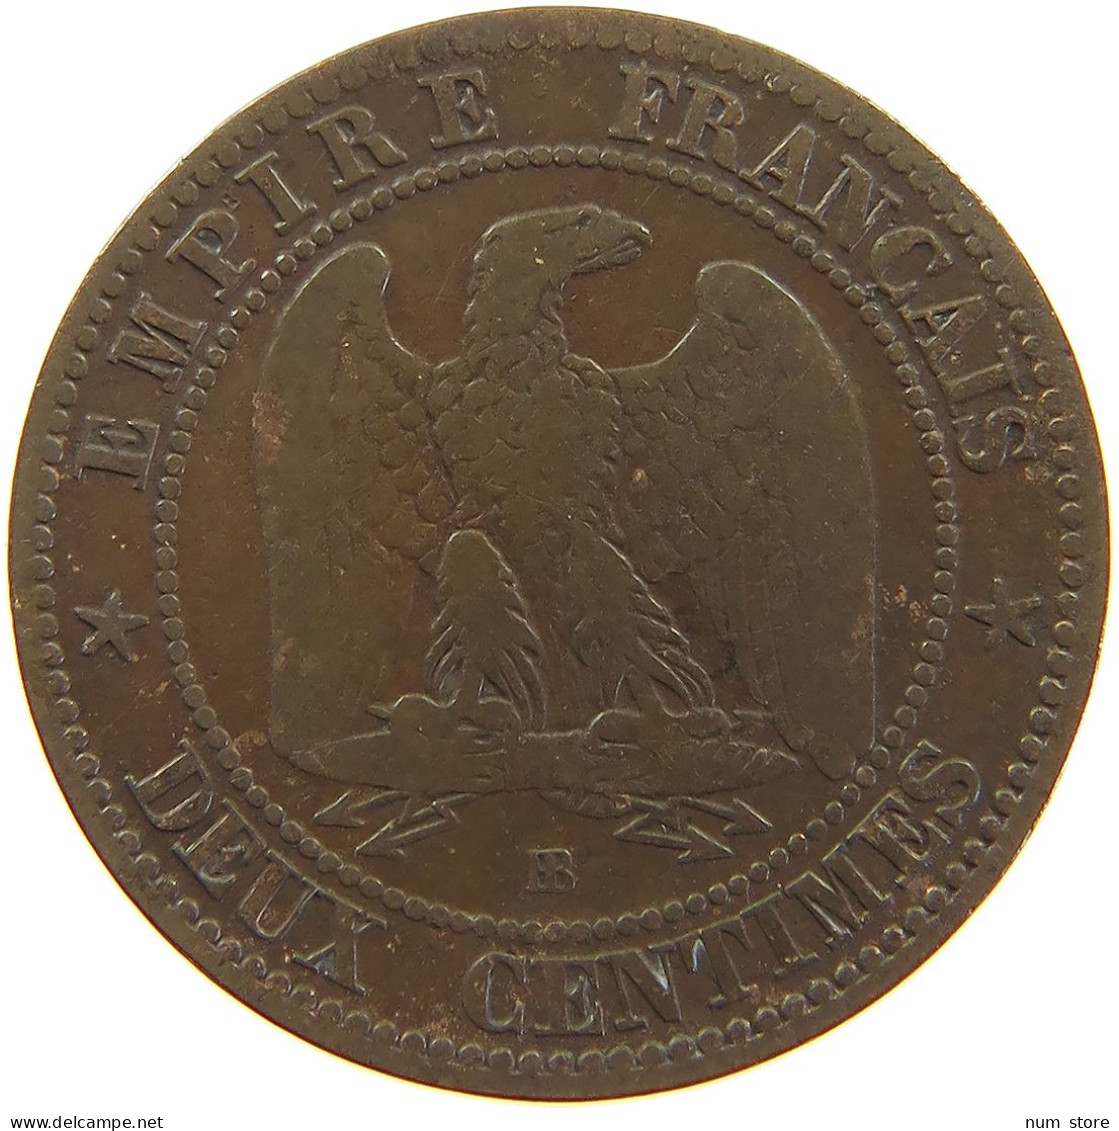 FRANCE 2 CENTIMES 1861 BB #a059 0153 - 2 Centimes